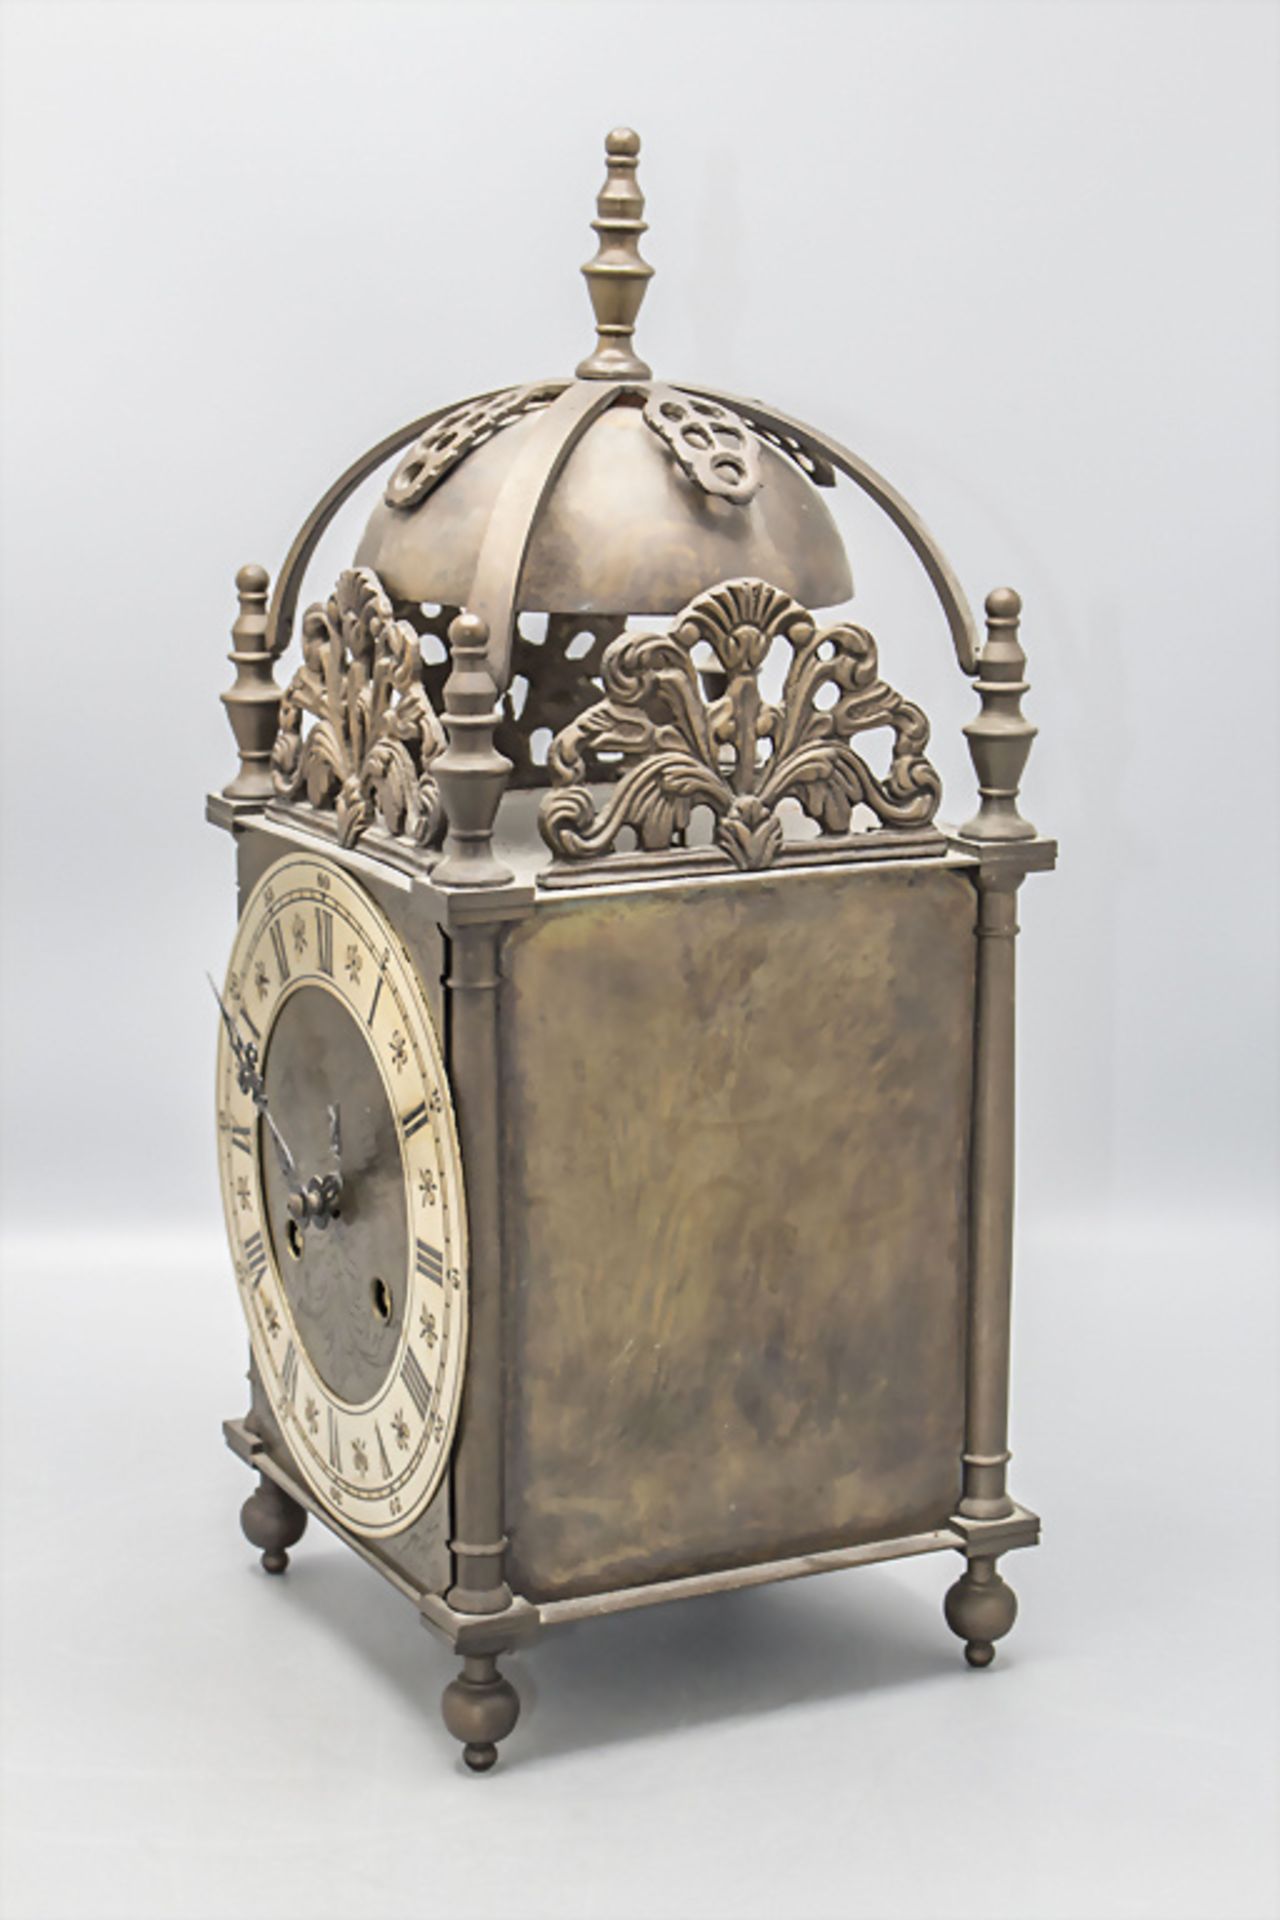 Laternenuhr / A latern clock, 20. Jh. - Image 6 of 7